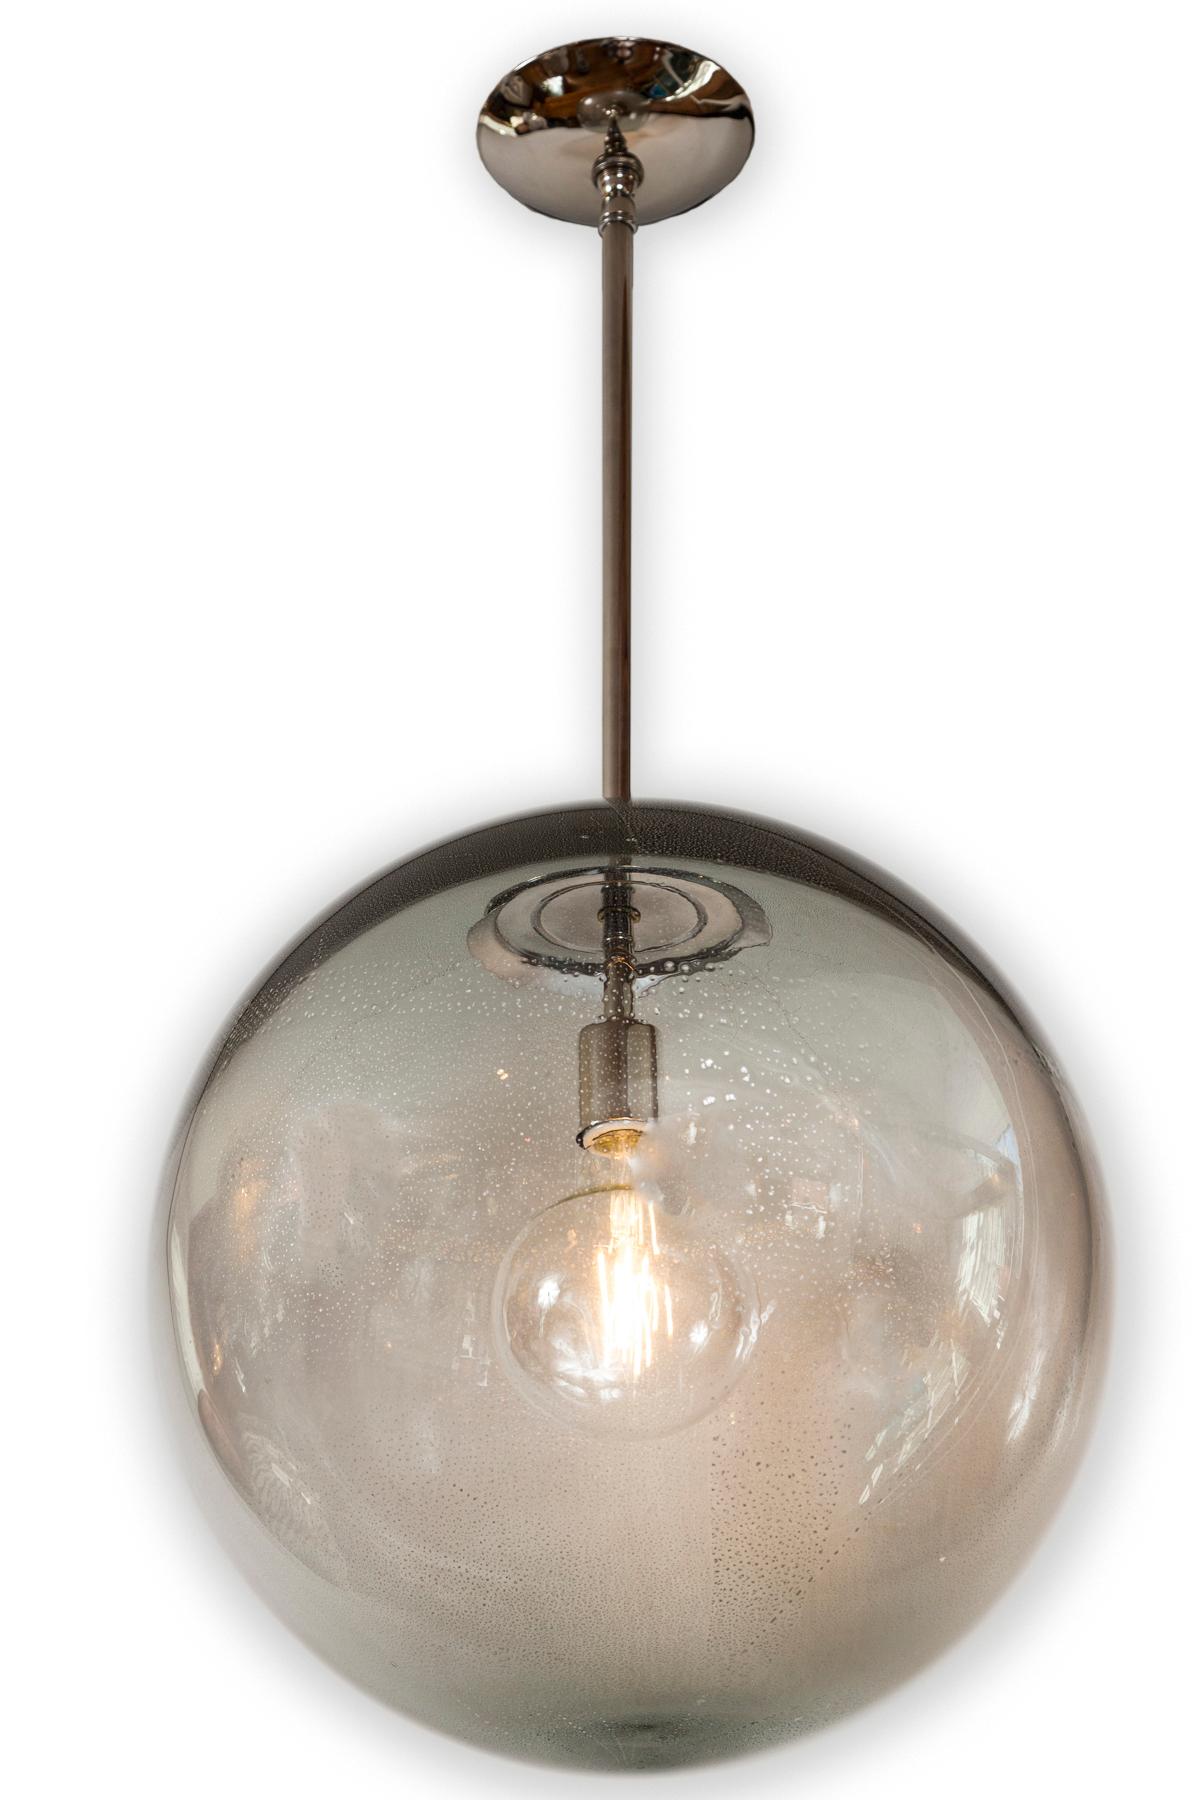 A wonderful set of very large mouth blown globe shaped pendants in a light gray with silver.  The silver offers a subtle texture with speckling and light overall shimmery quality upon illumination.  Each globe while the same color are unique in its